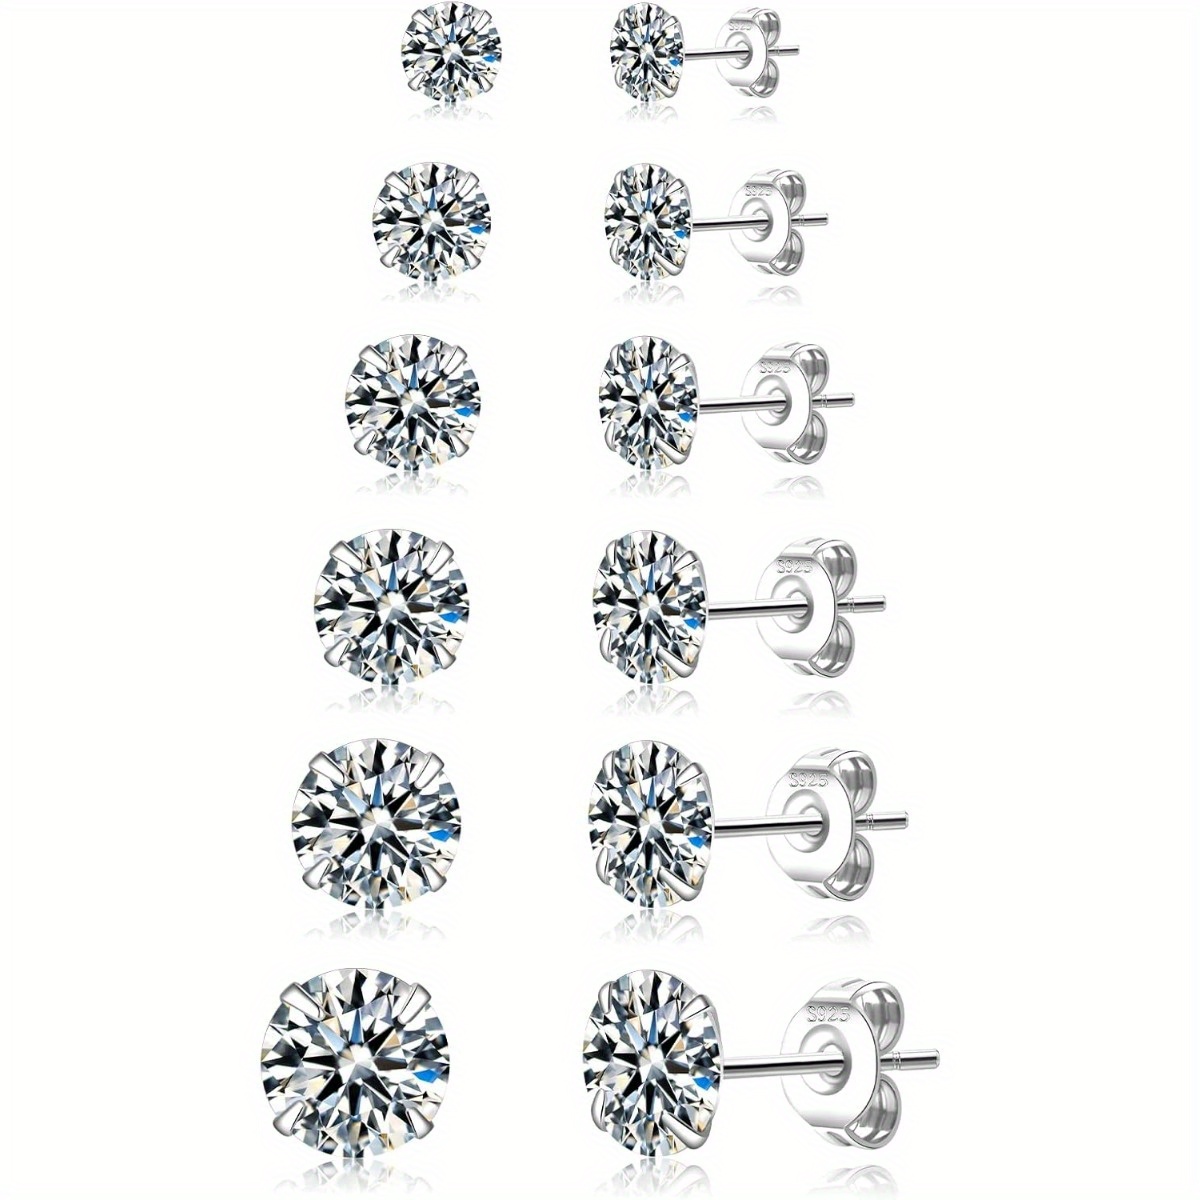 

6 Pairs Of 925 Sterling Silver Stud Earrings Set Anti-allergy Small Stud Earrings With Cubic Zirconia Earrings For Women 2mm-7mm